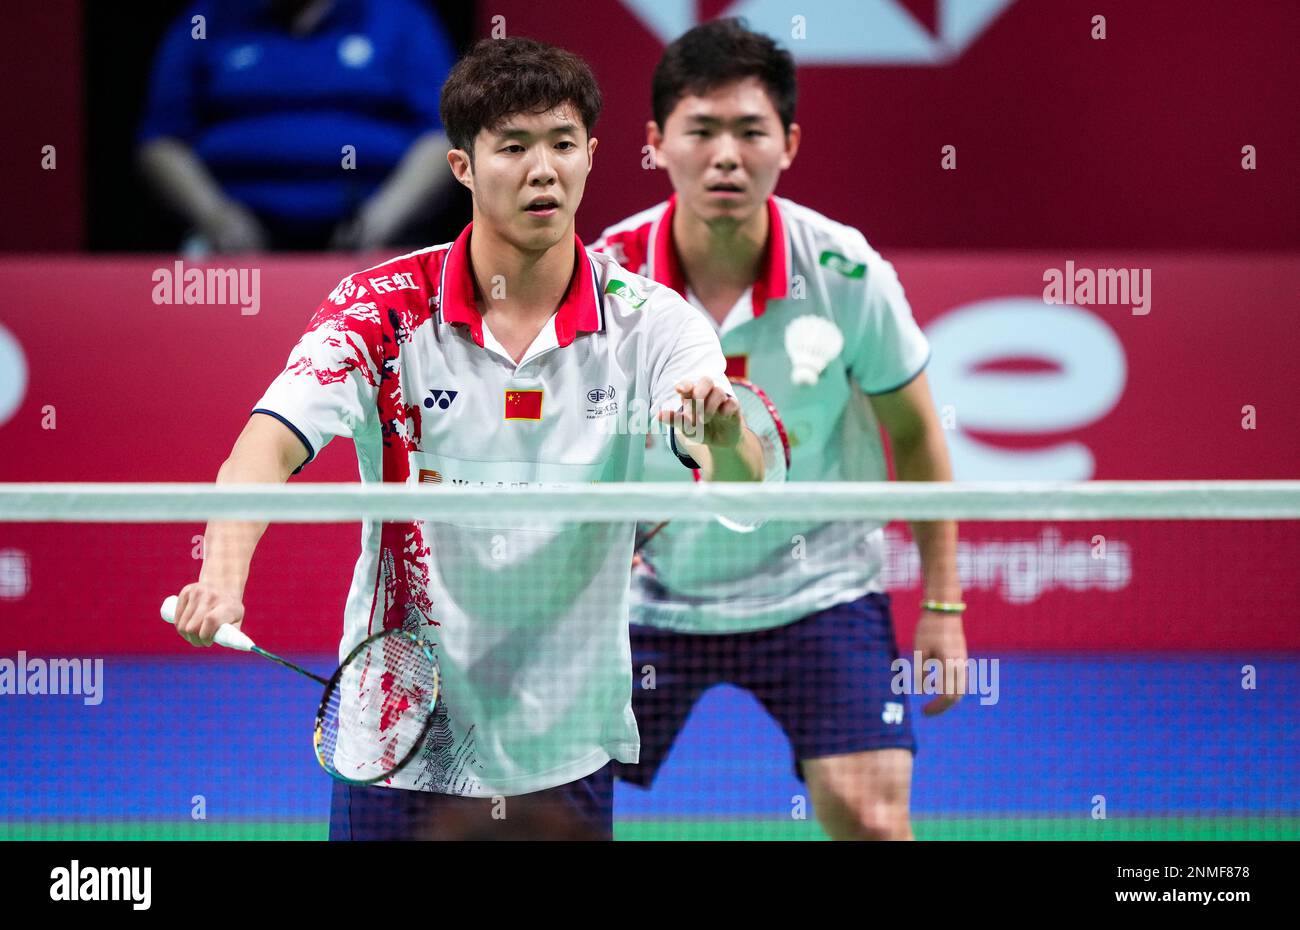 Chinas He Ji Ting, left, and Zhou Hao Dong in action during a mens double match in the Thomas Cup mens team final badminton match between China and Indonesia, in Aarhus, Denmark,